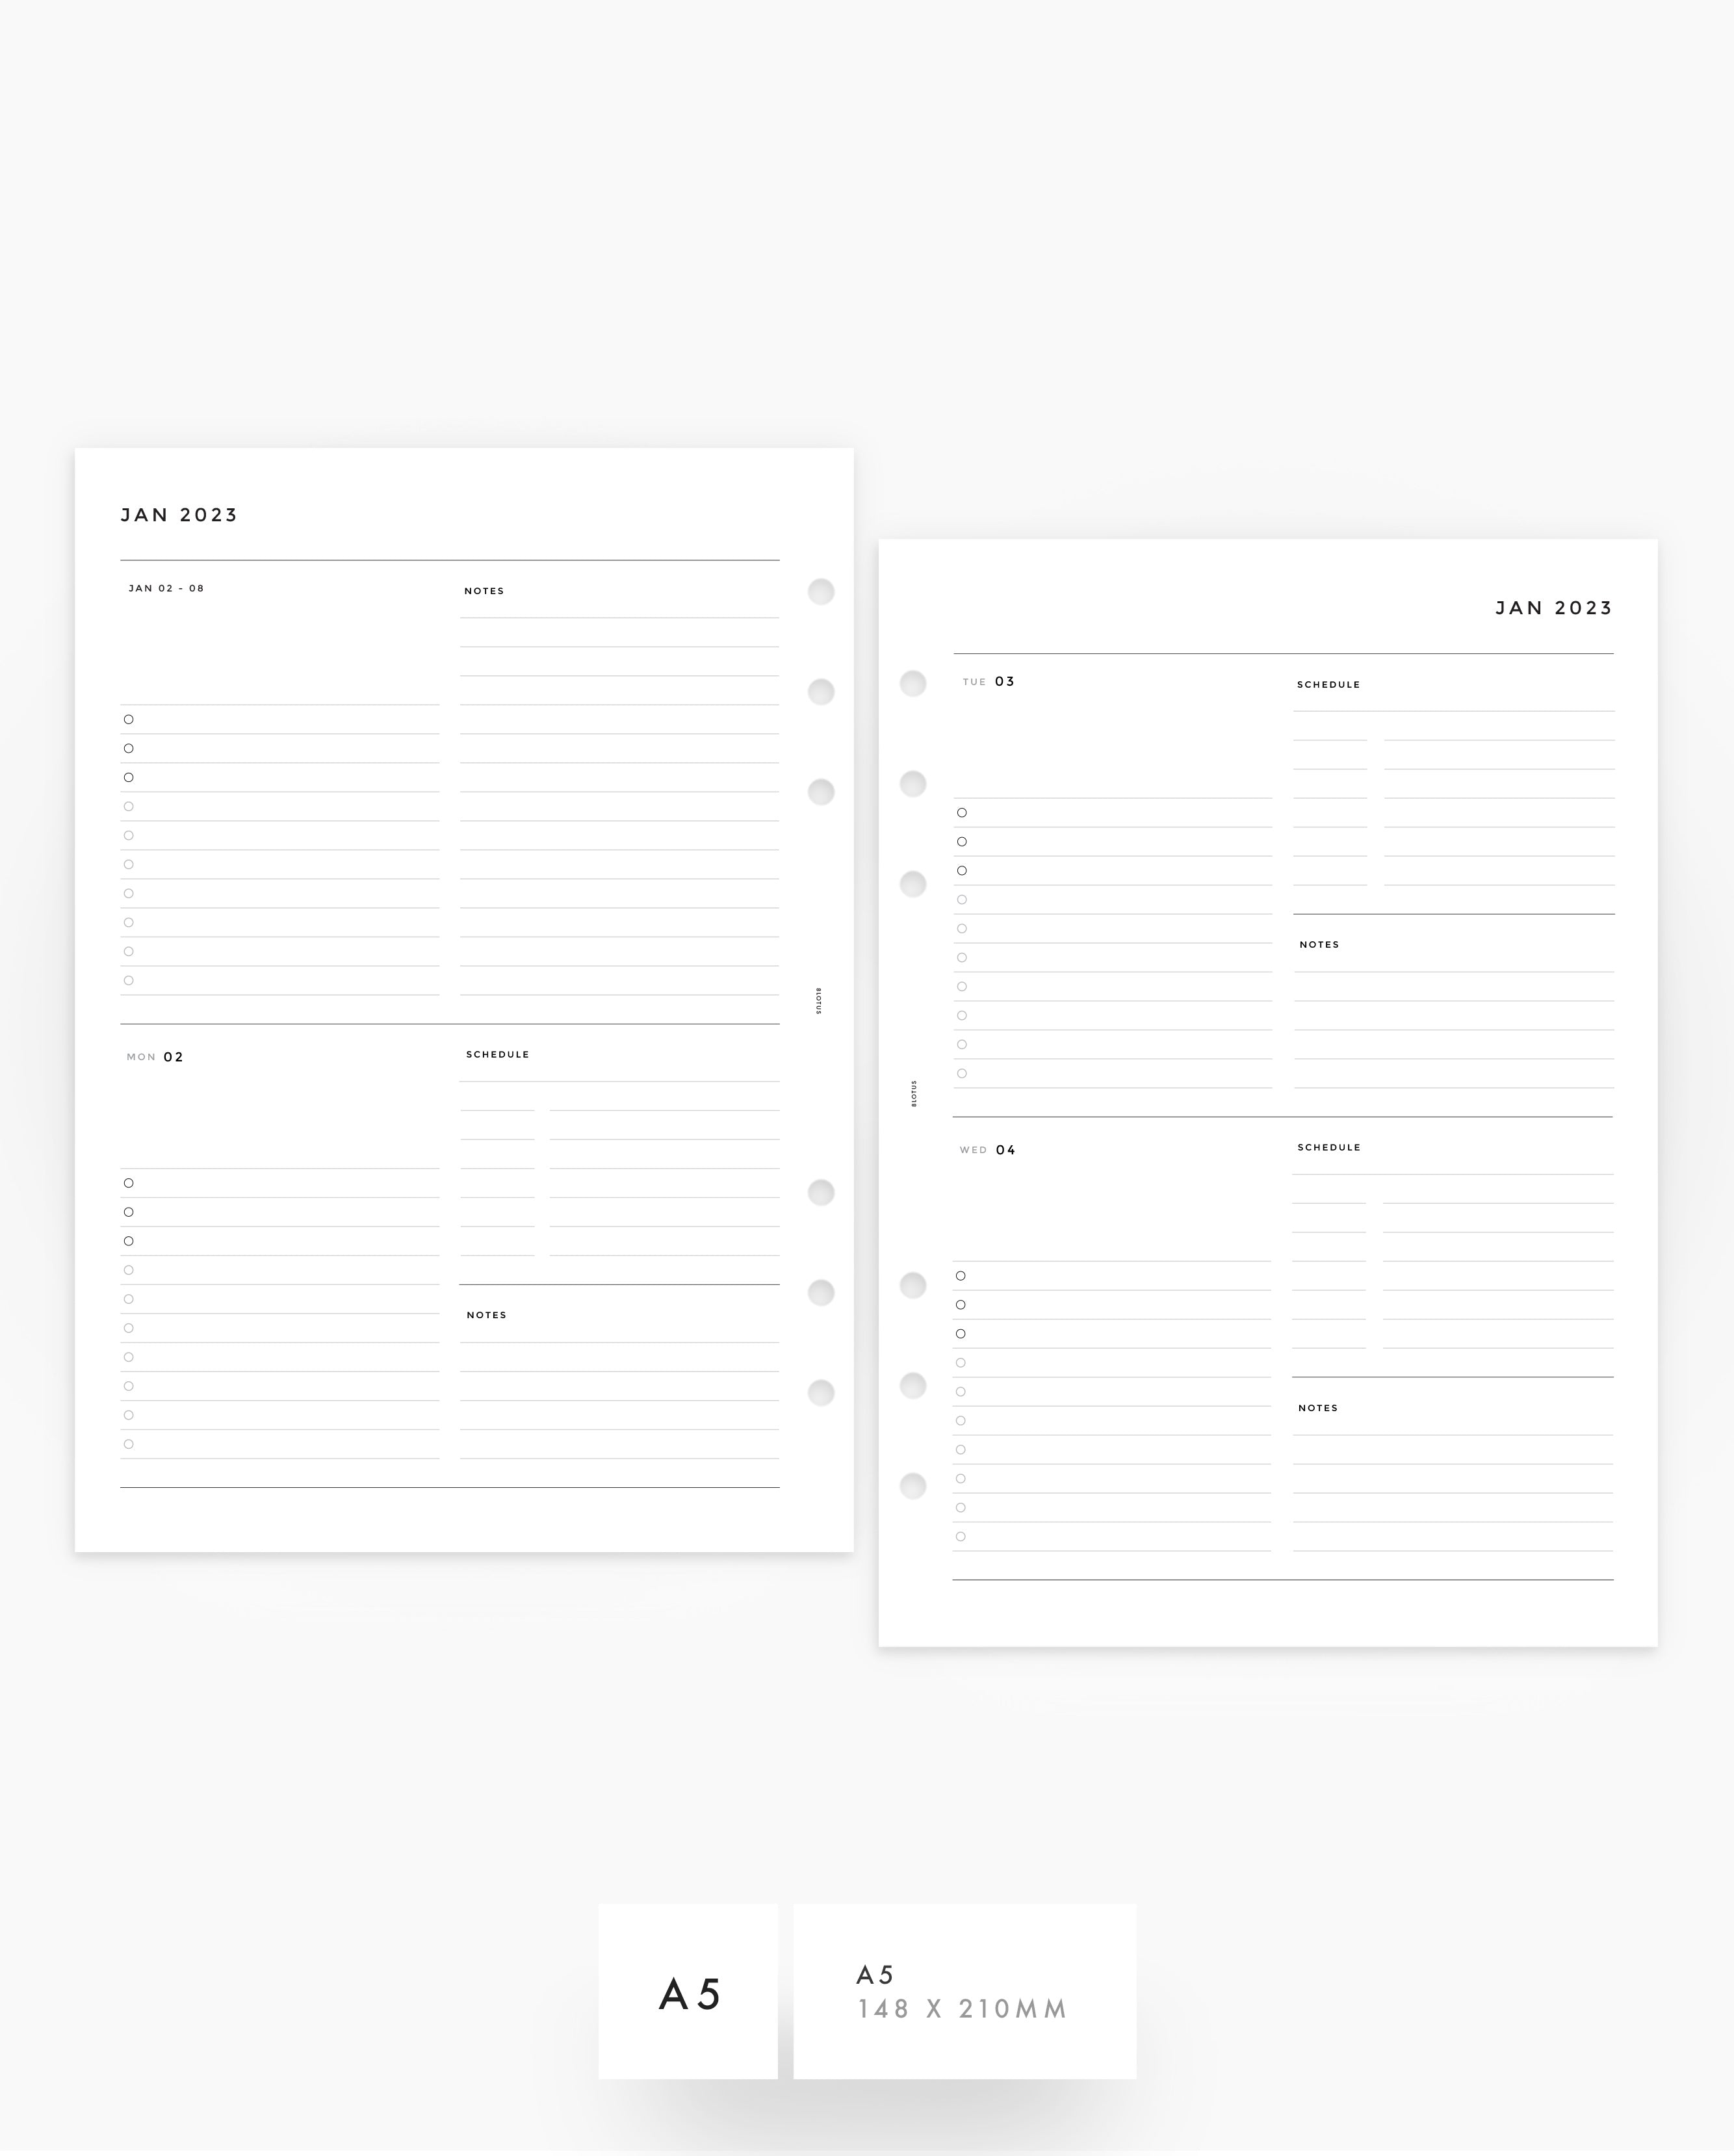 MN079 - 2023 Daily Planner - 2DO1P